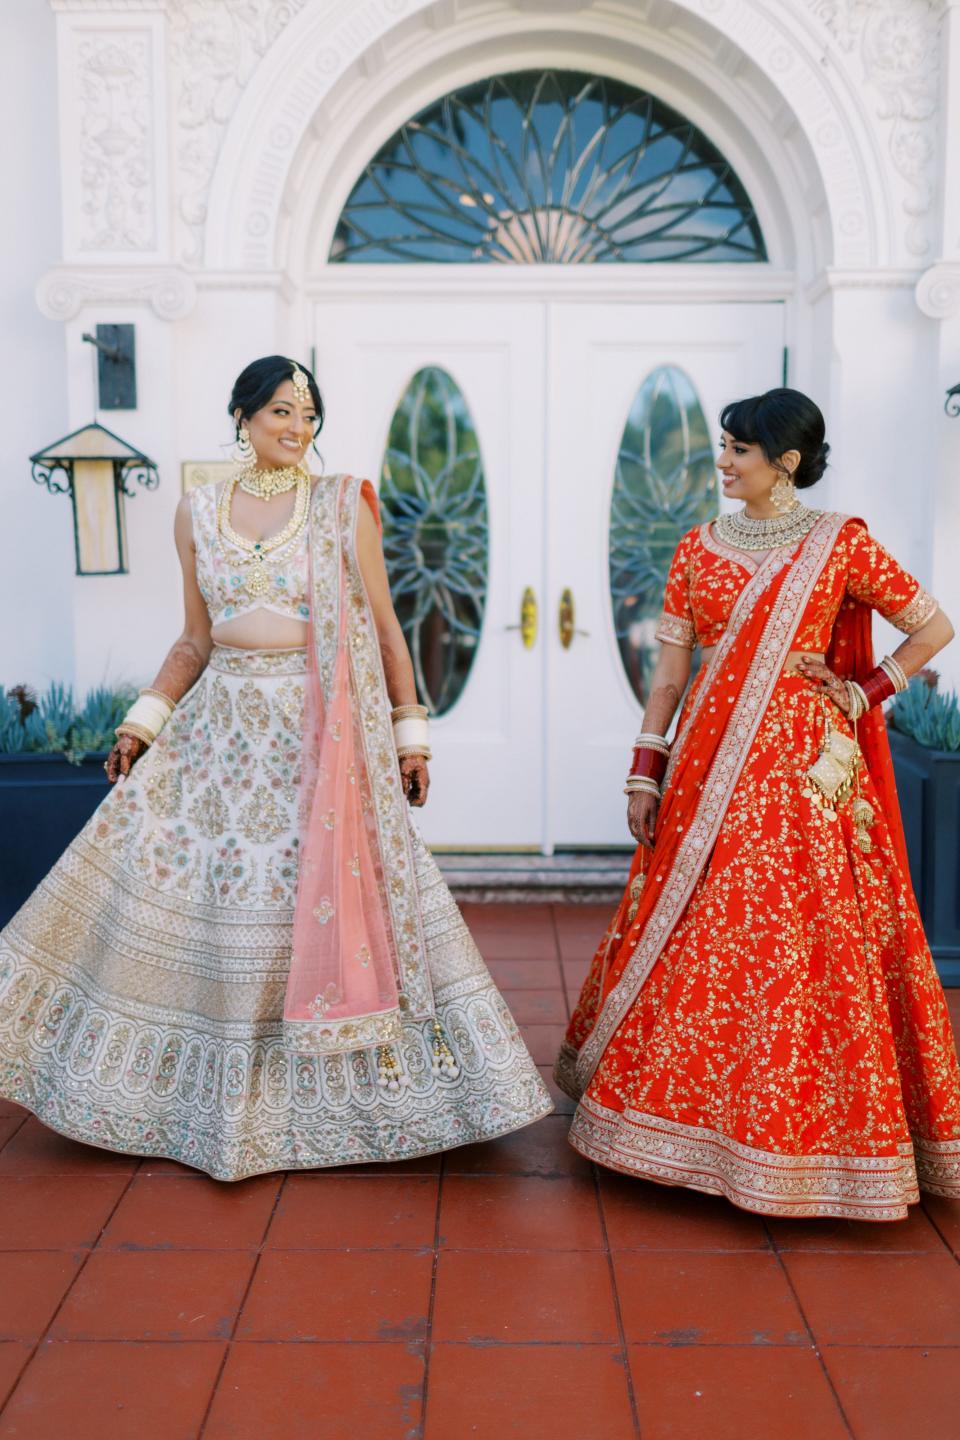 The brides wanted to make sure their outfits paid homage to their Indian roots.